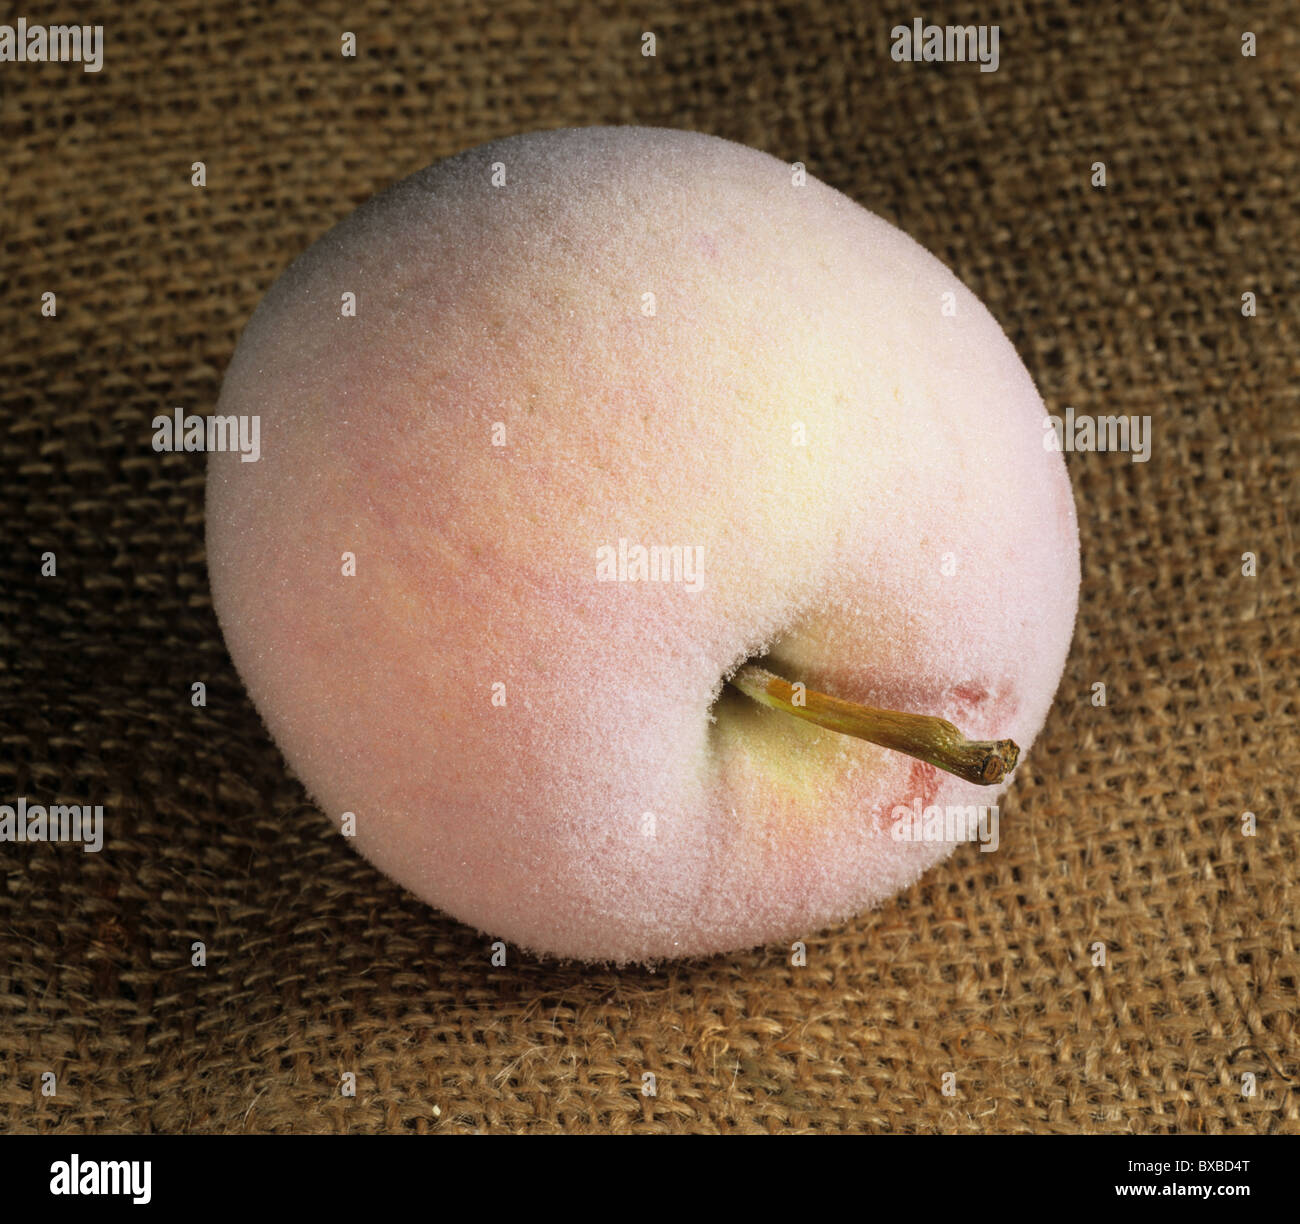 Frozen apple uncut and frosted Stock Photo